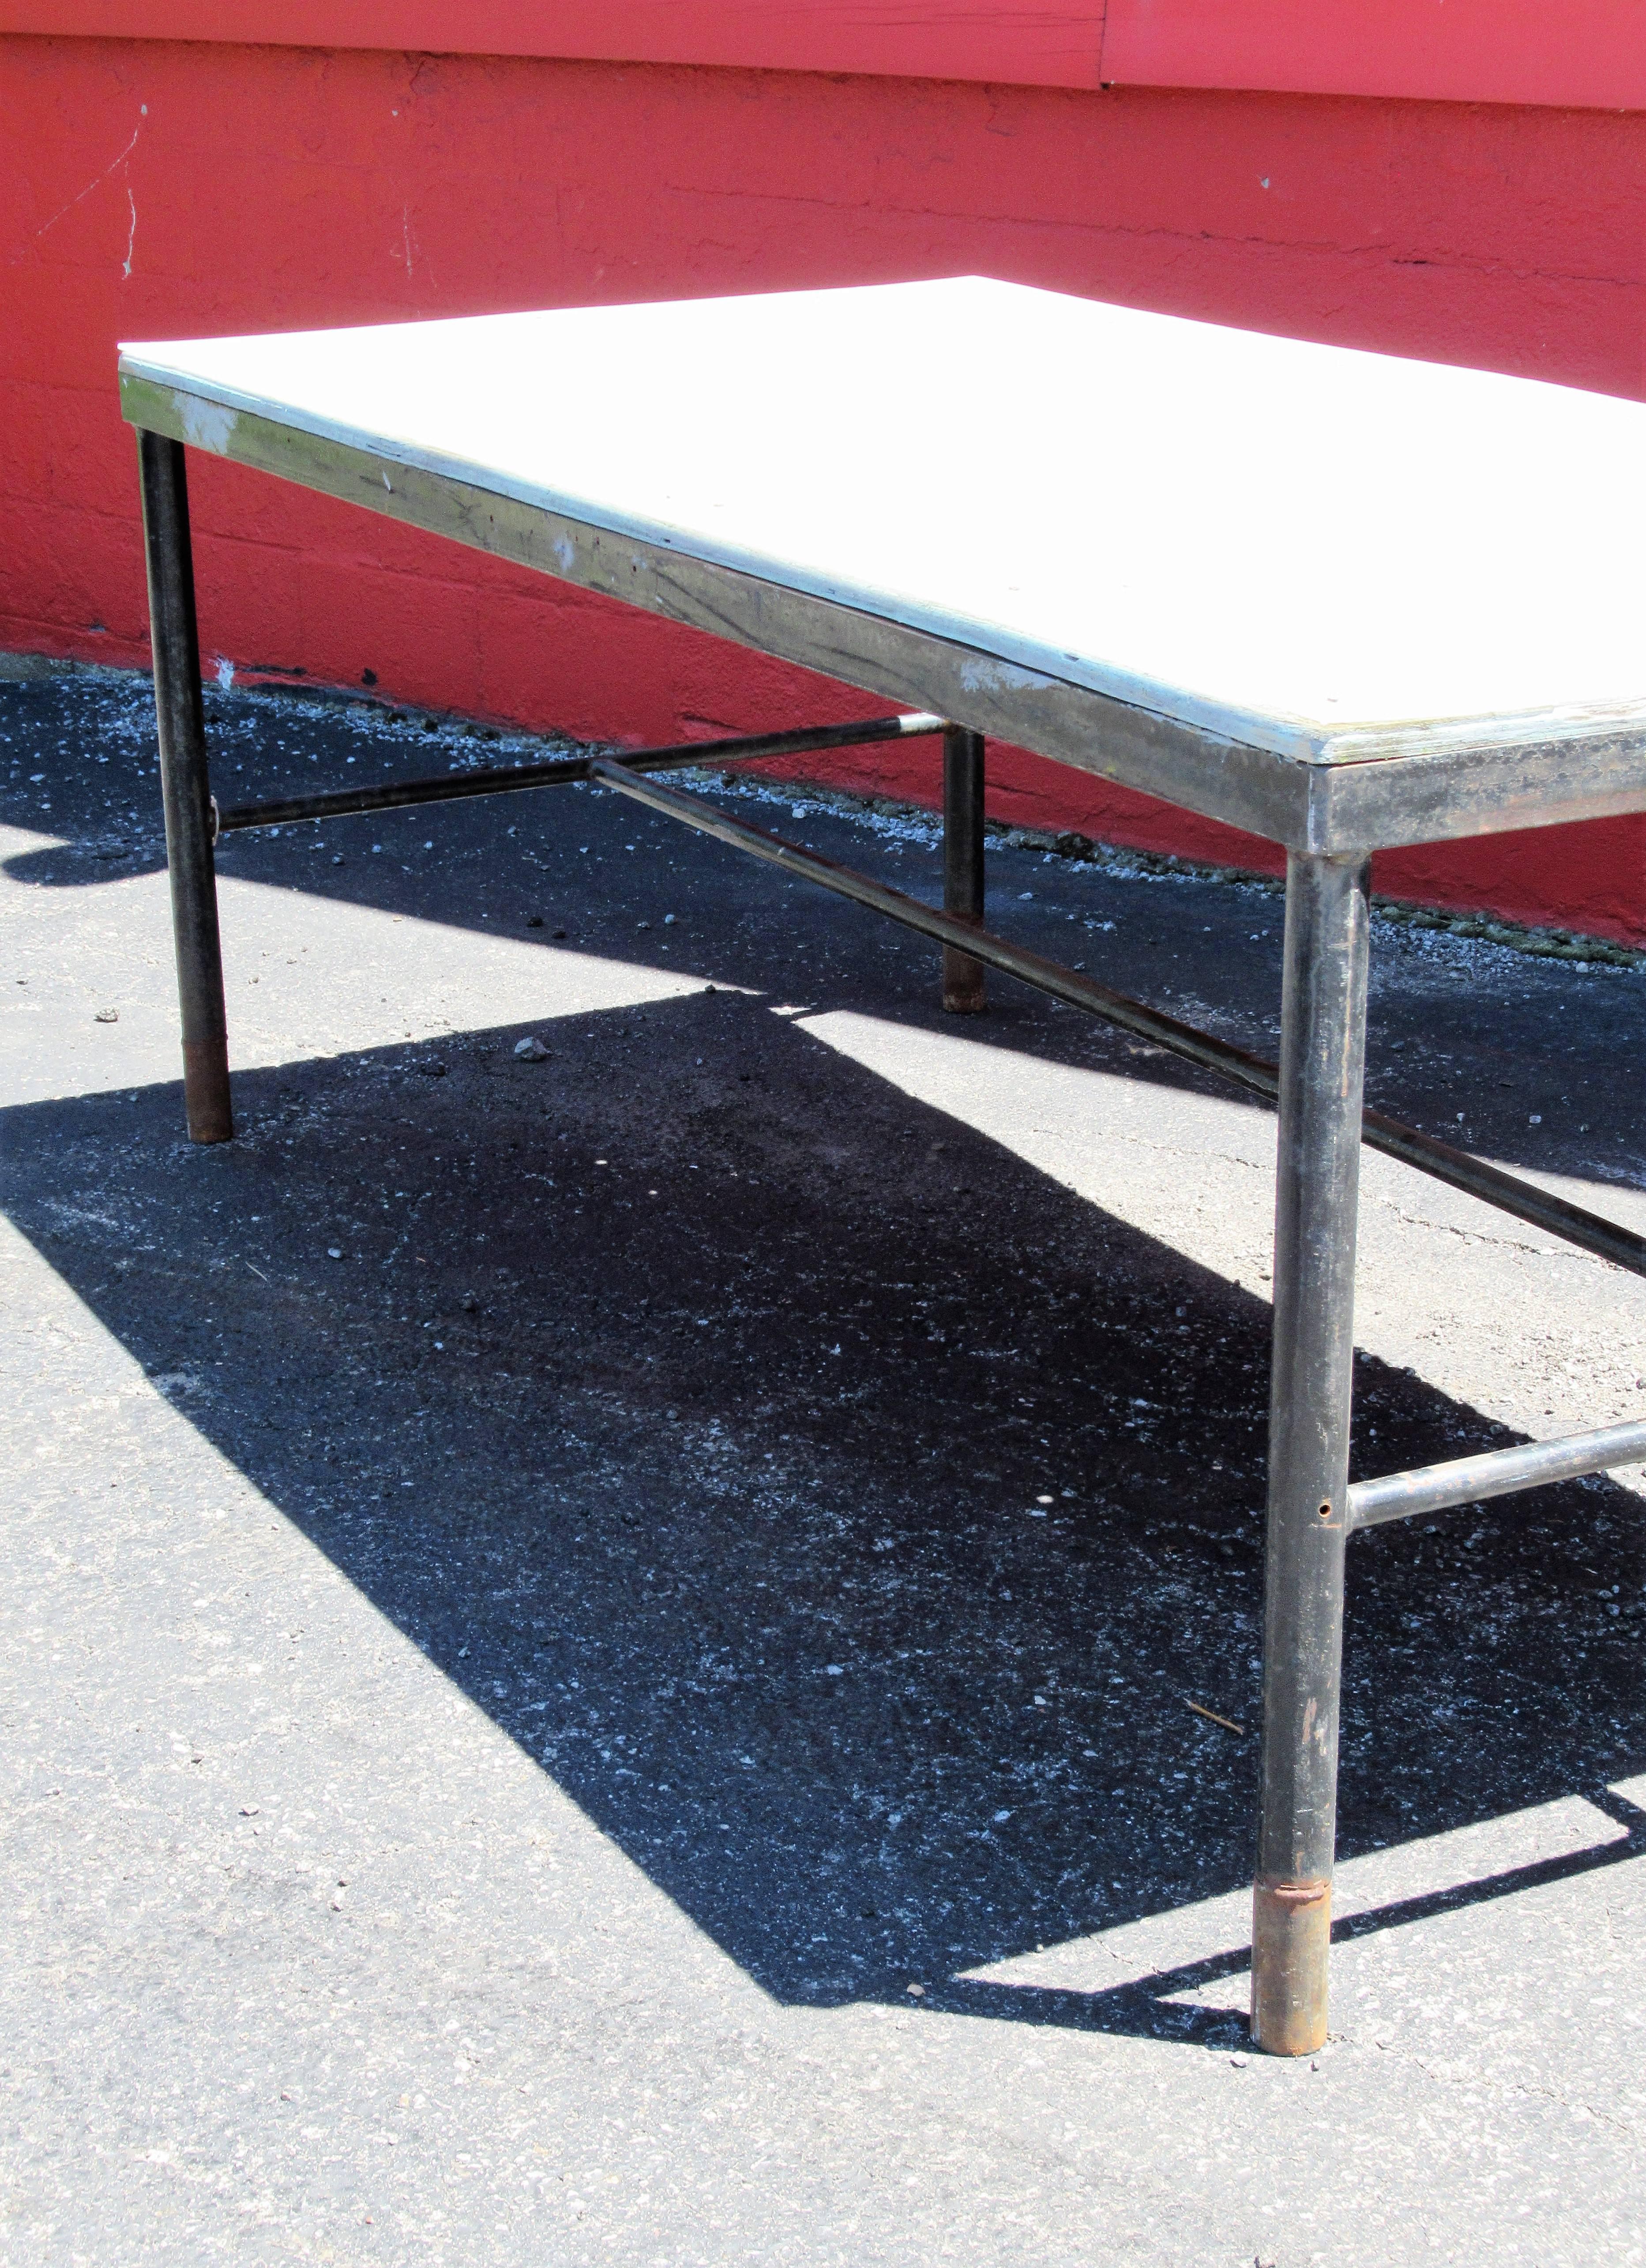 Large antique American Industrial factory work table, the tubular iron base legs with two side stretchers joined by long centre stretcher. The original plywood top covered with screwed down acrylic plexiglass sheet. Beautiful architectural form.